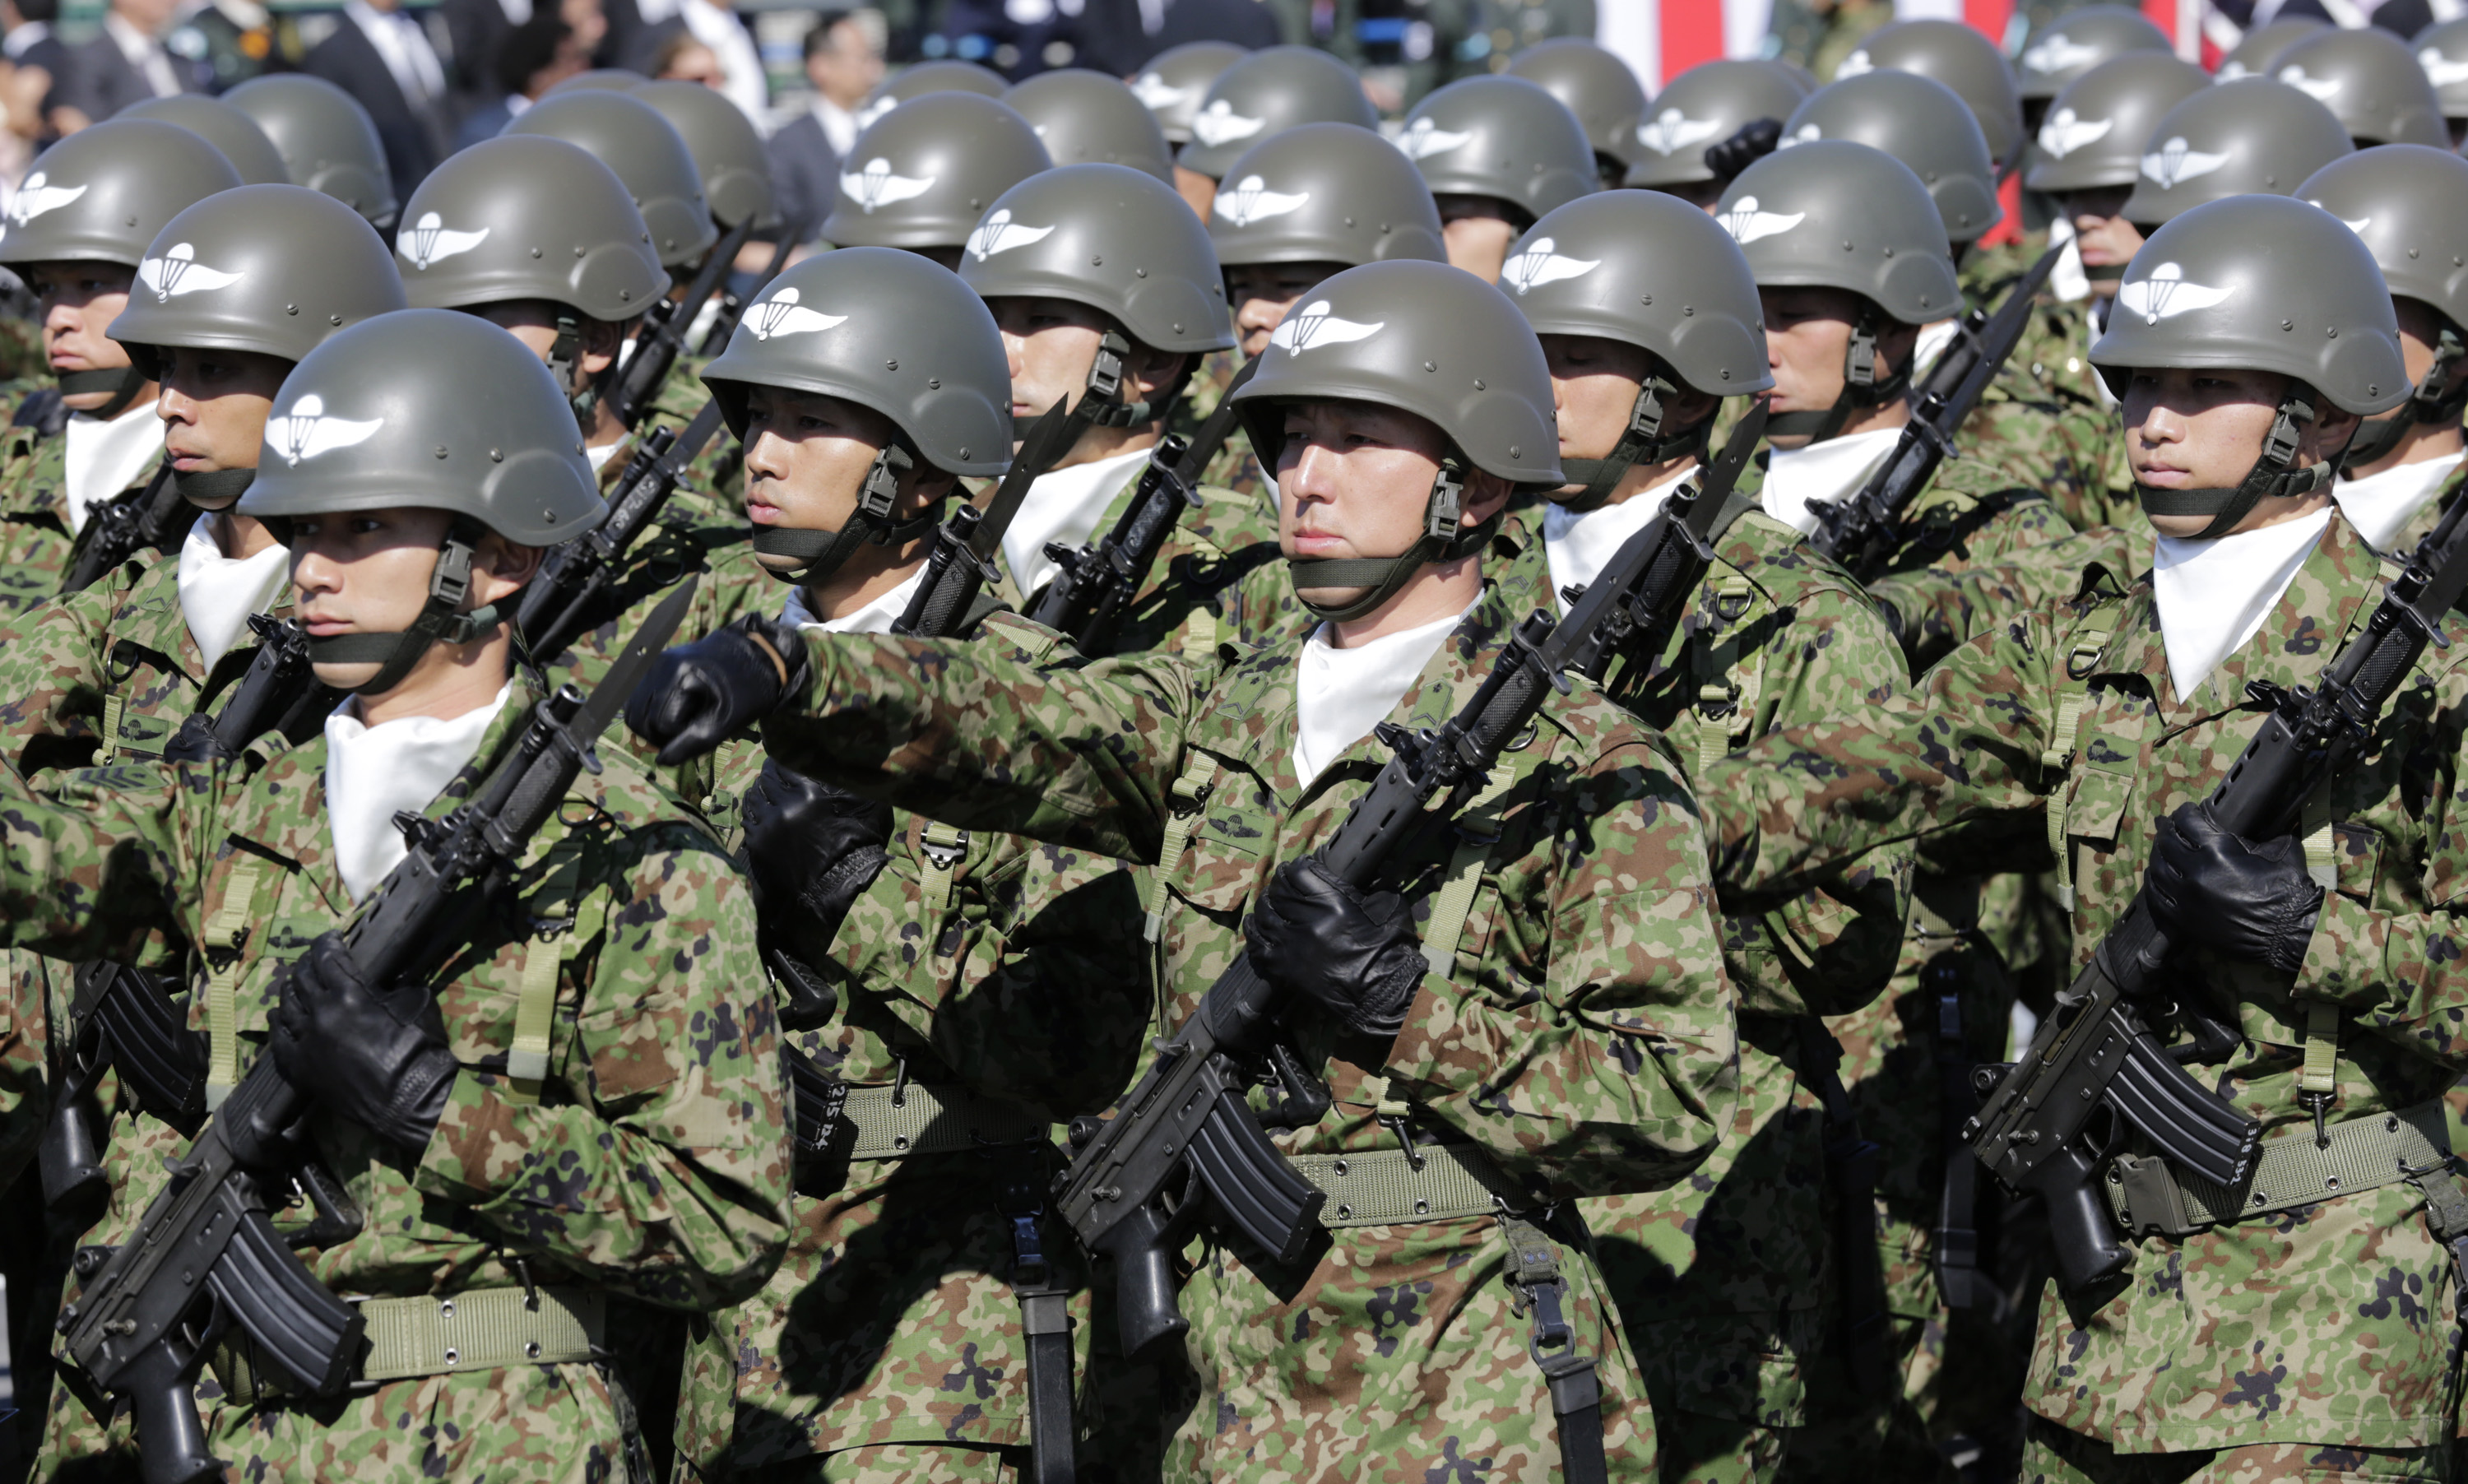 Japan, U.S. considering offensive military capability for Tokyo